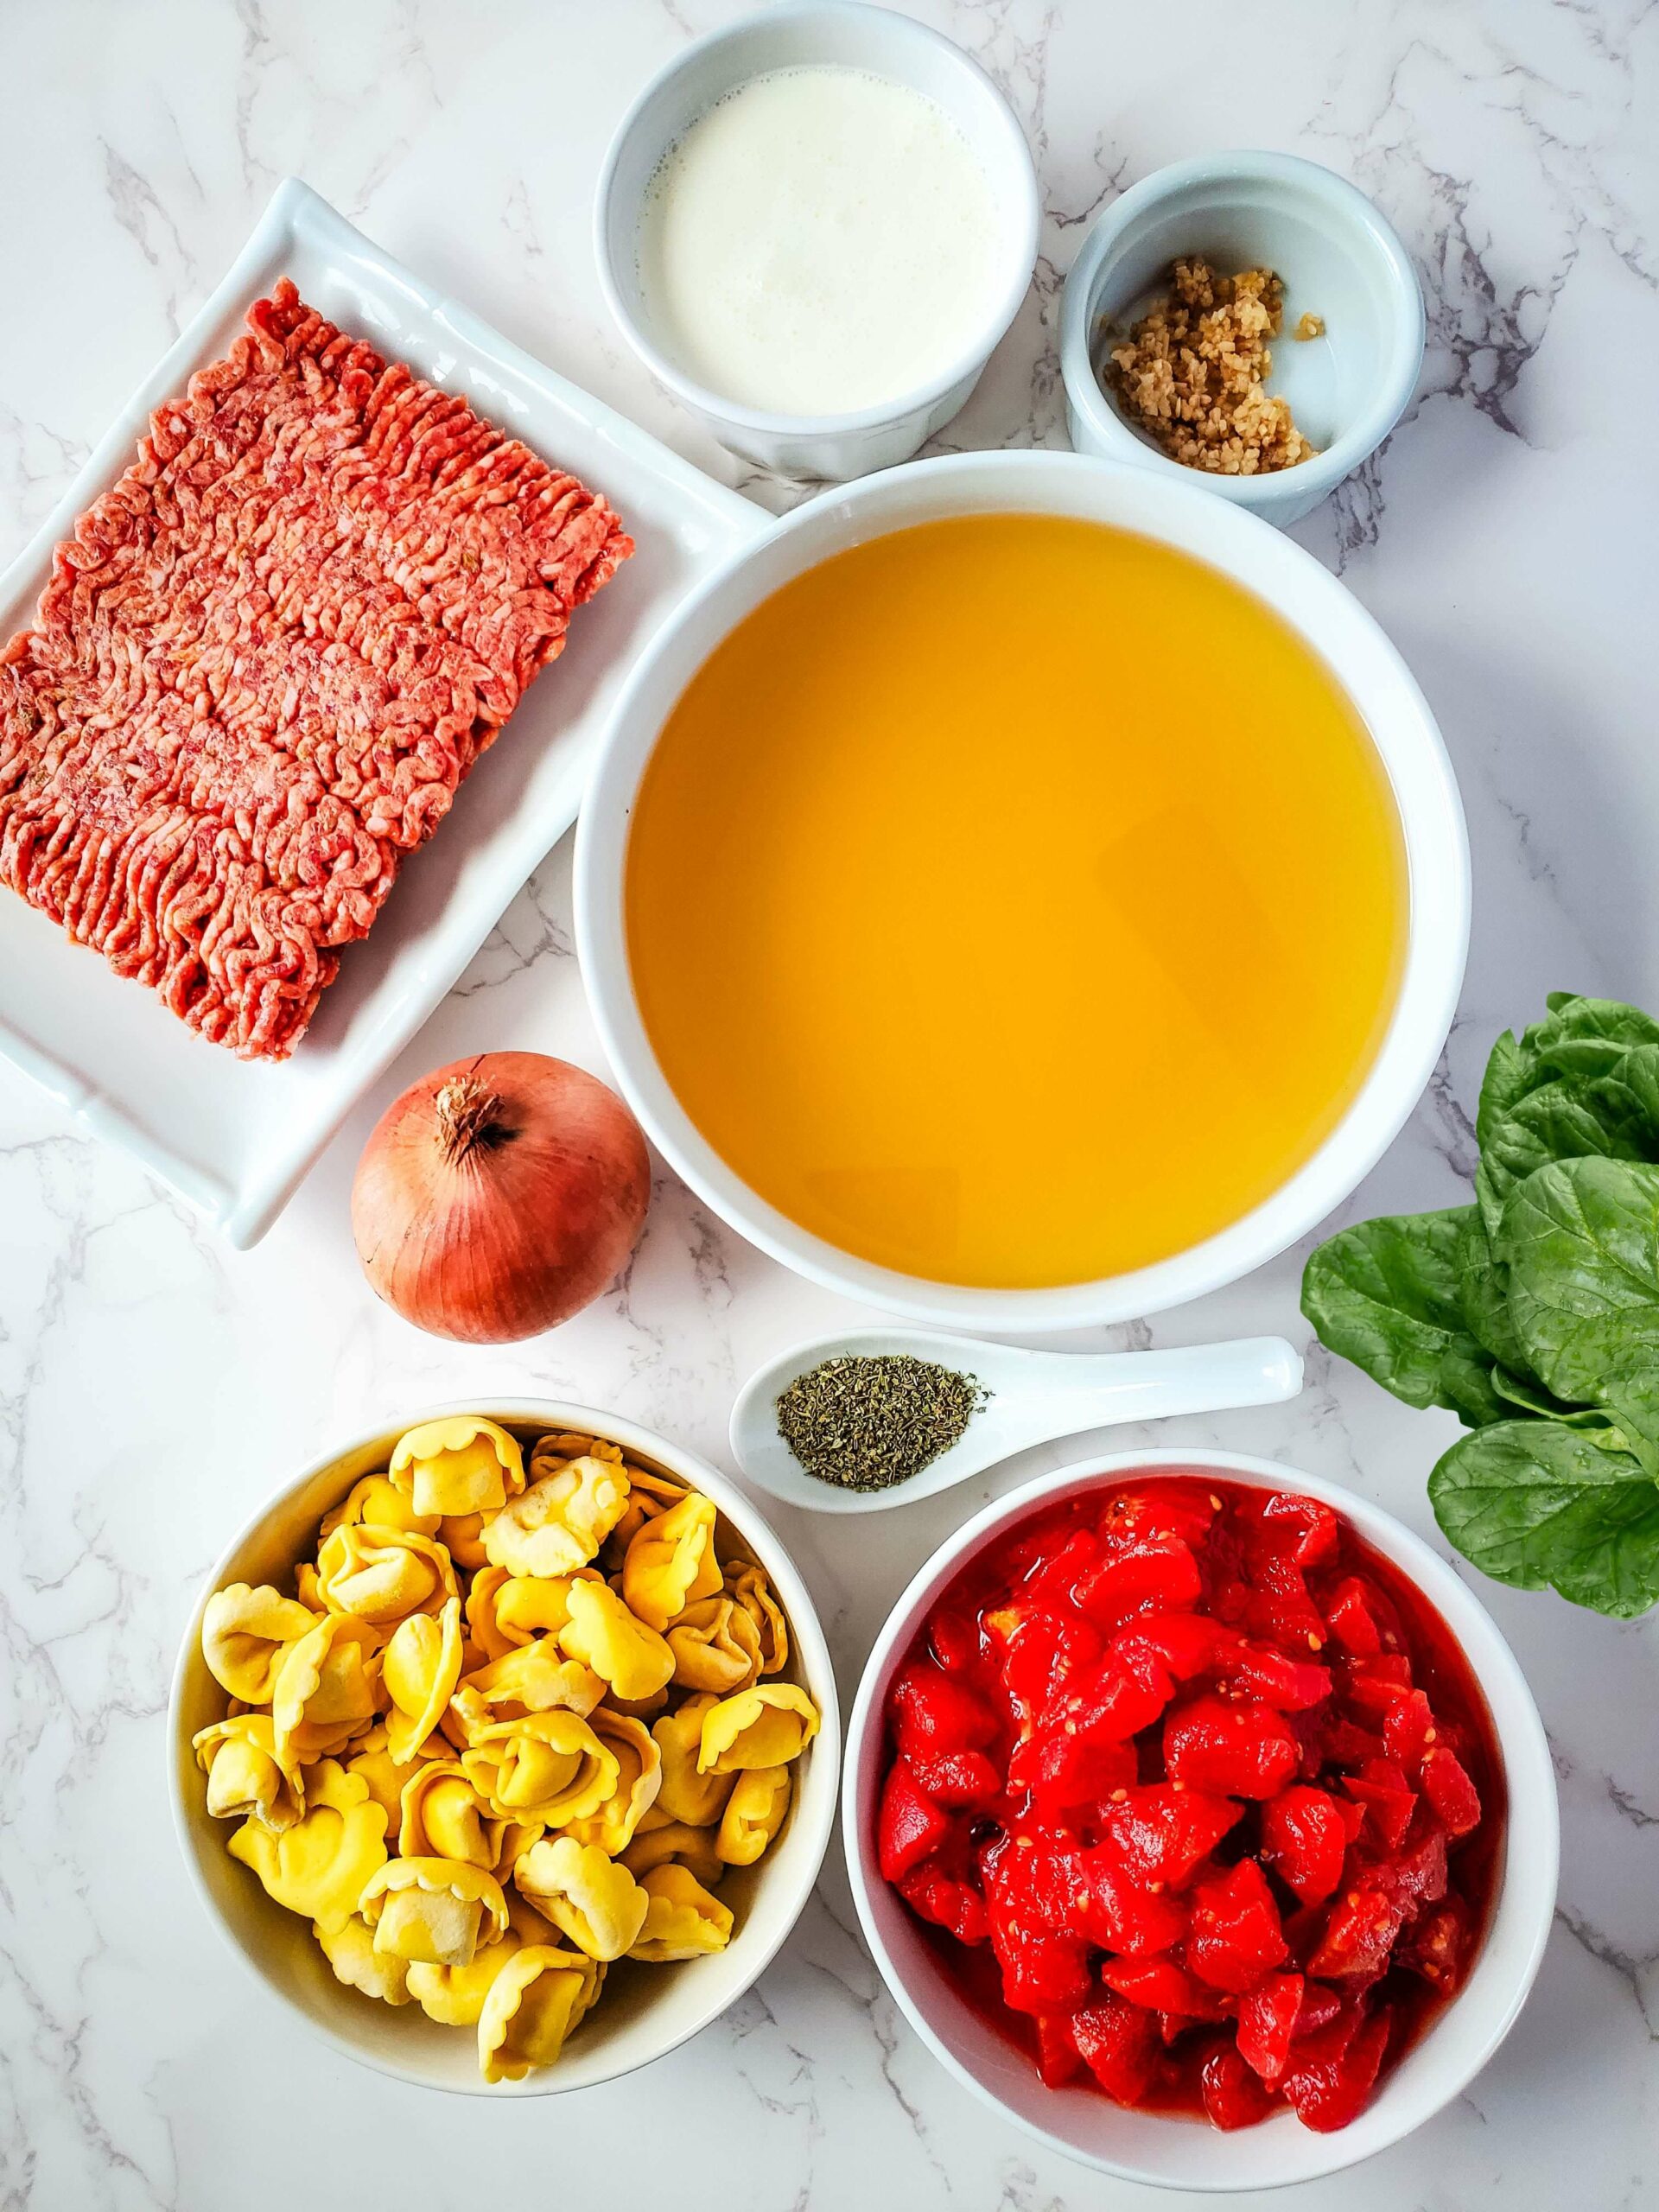 Ingredients for Sausage and Spinach meatballs in a white bowl on a marble countertop.